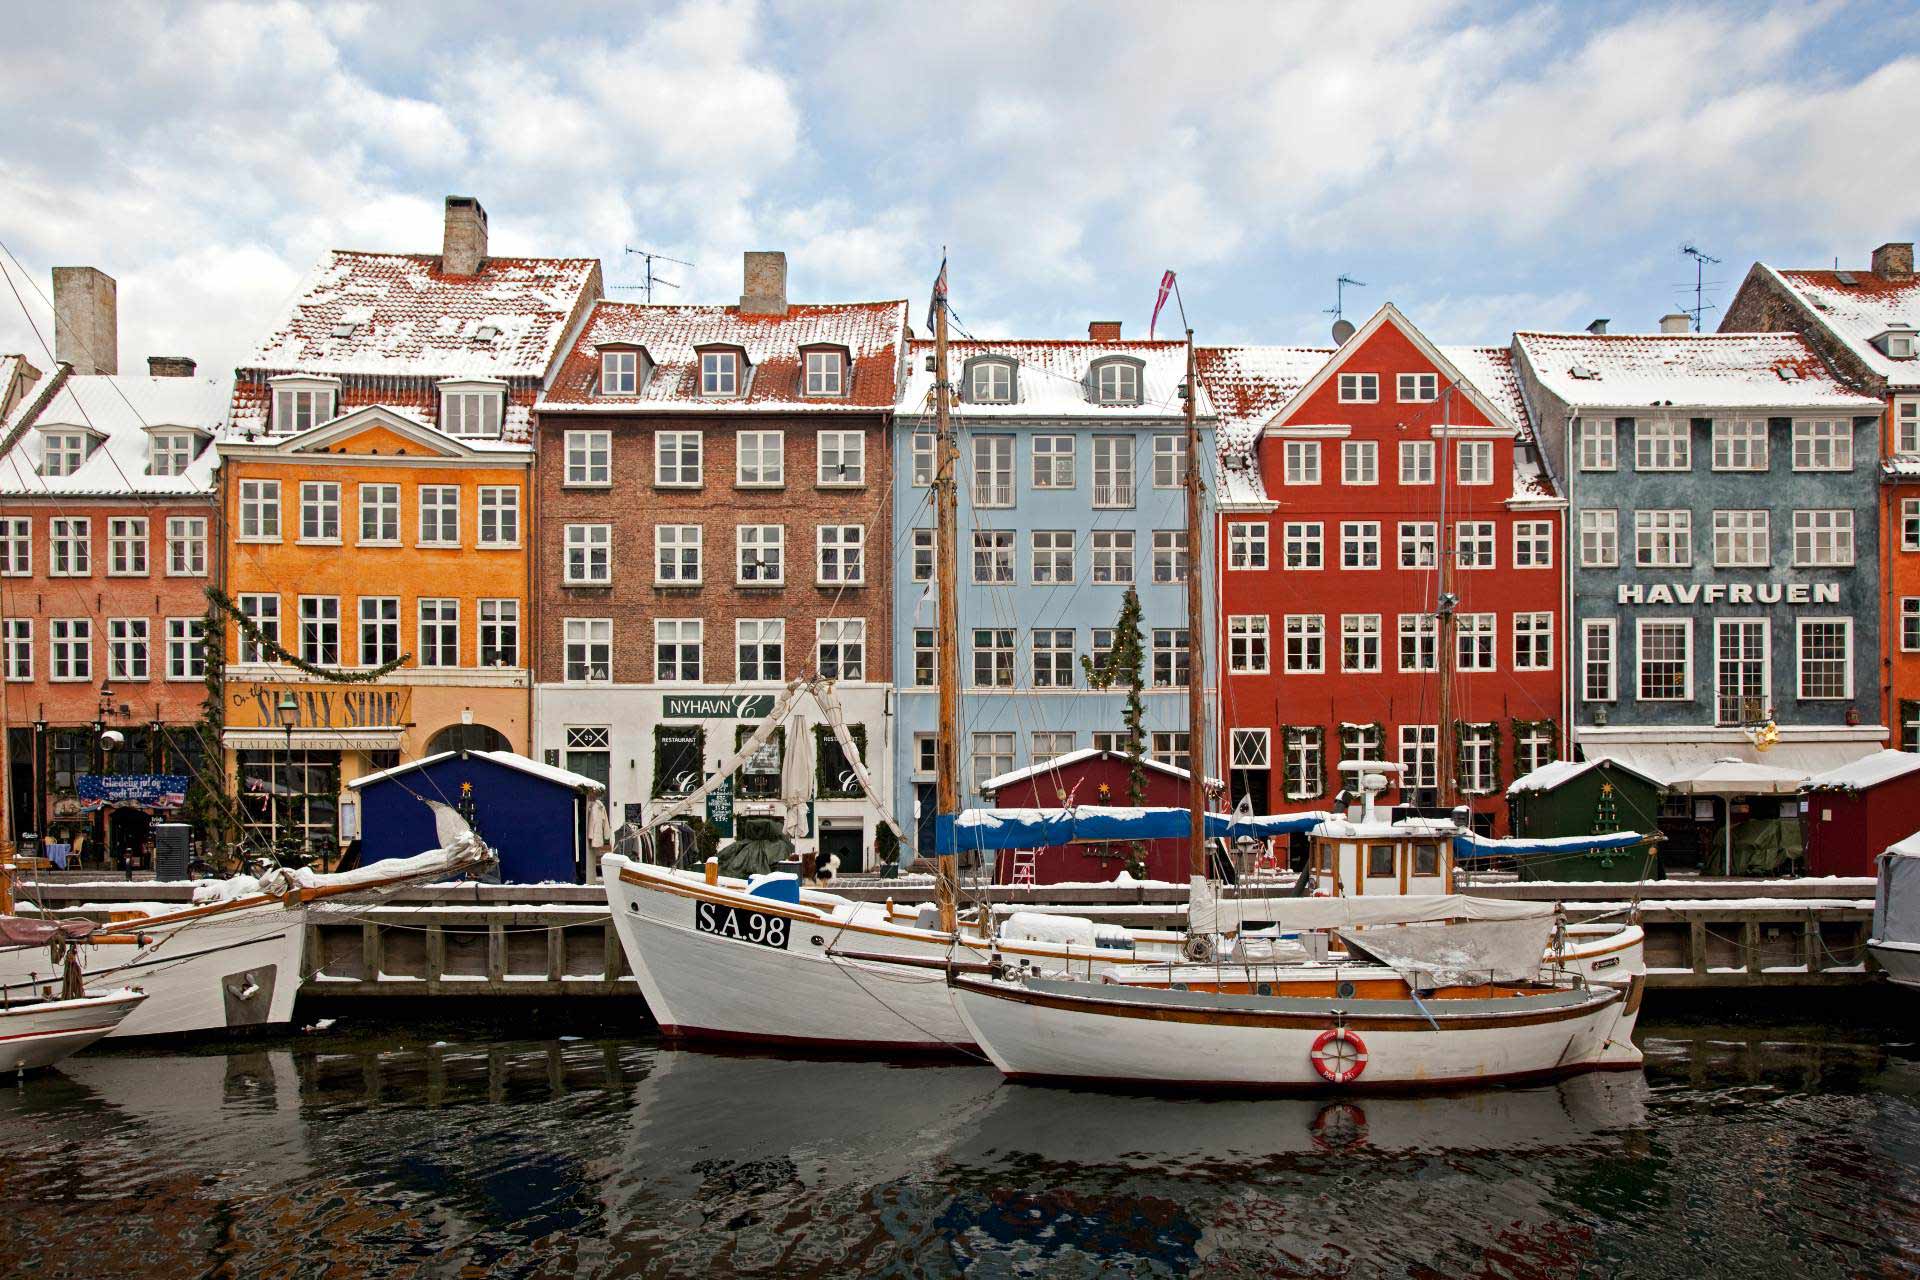 Nyhavn canal under the snow